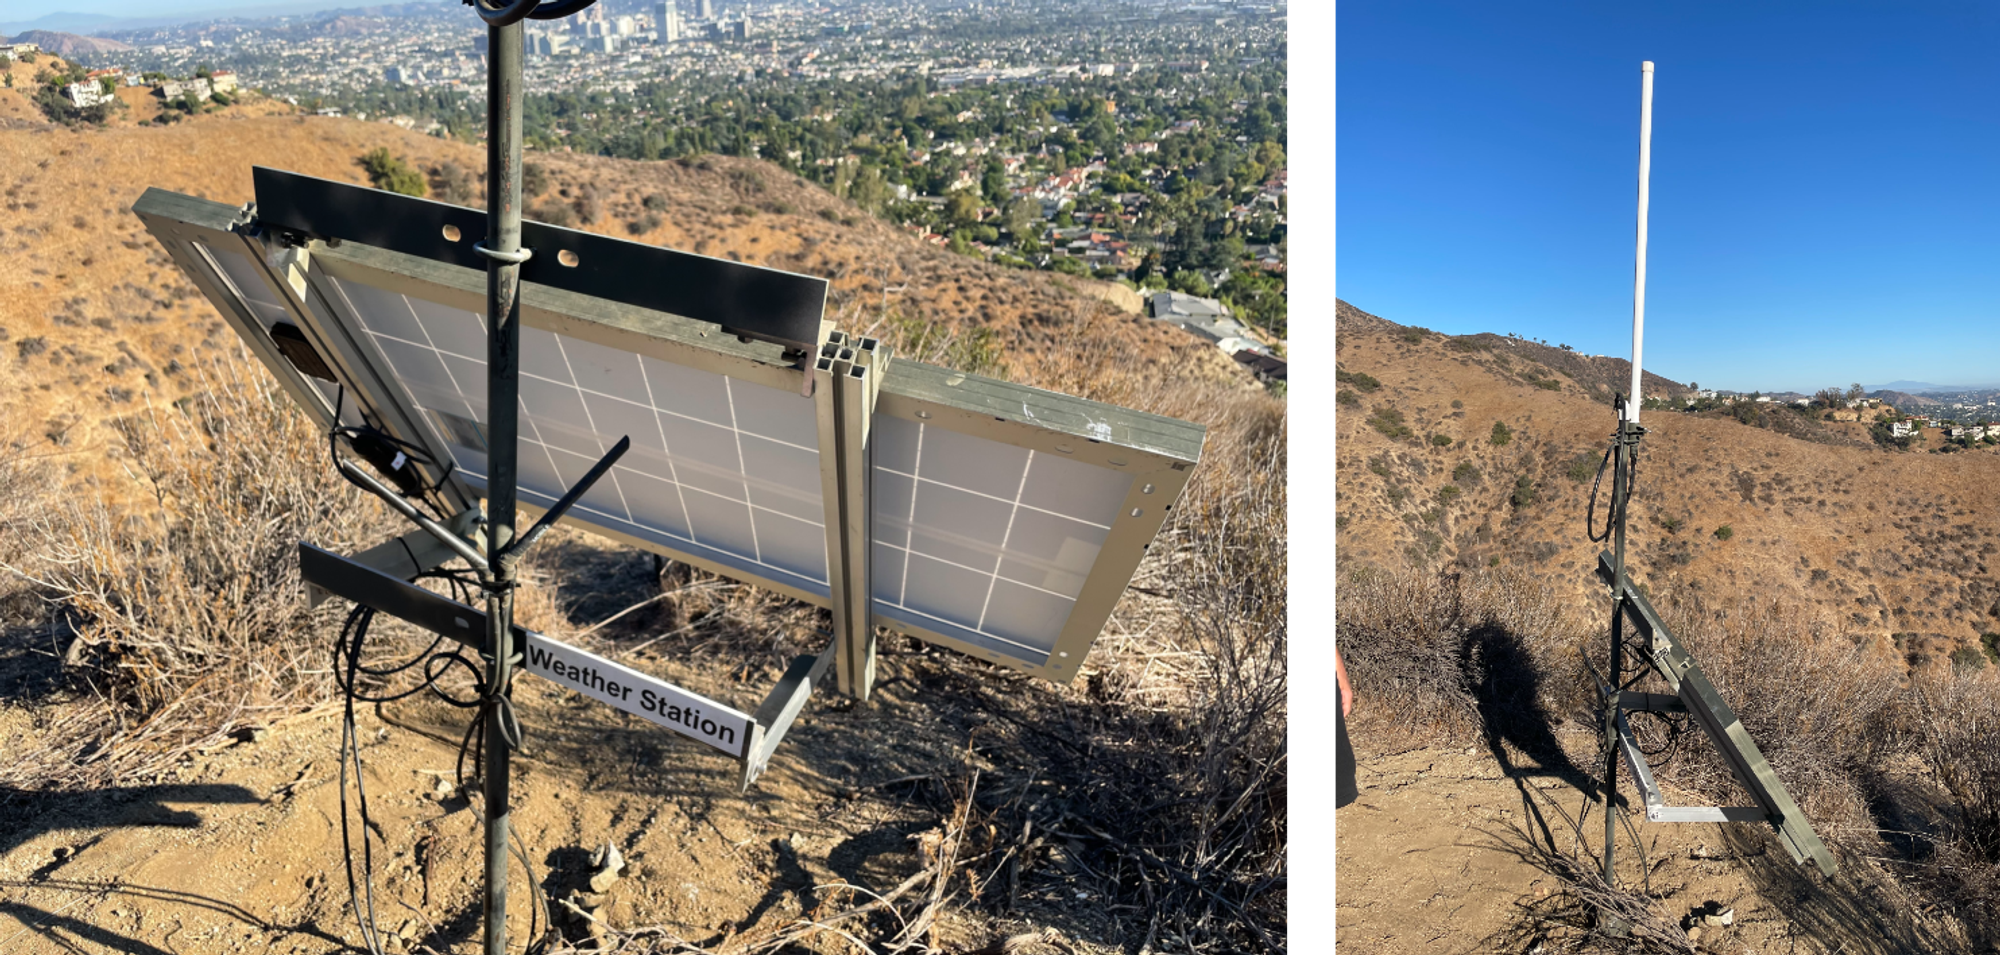 The first miner discovered above Glendale, CA disguised as a “weather station” 